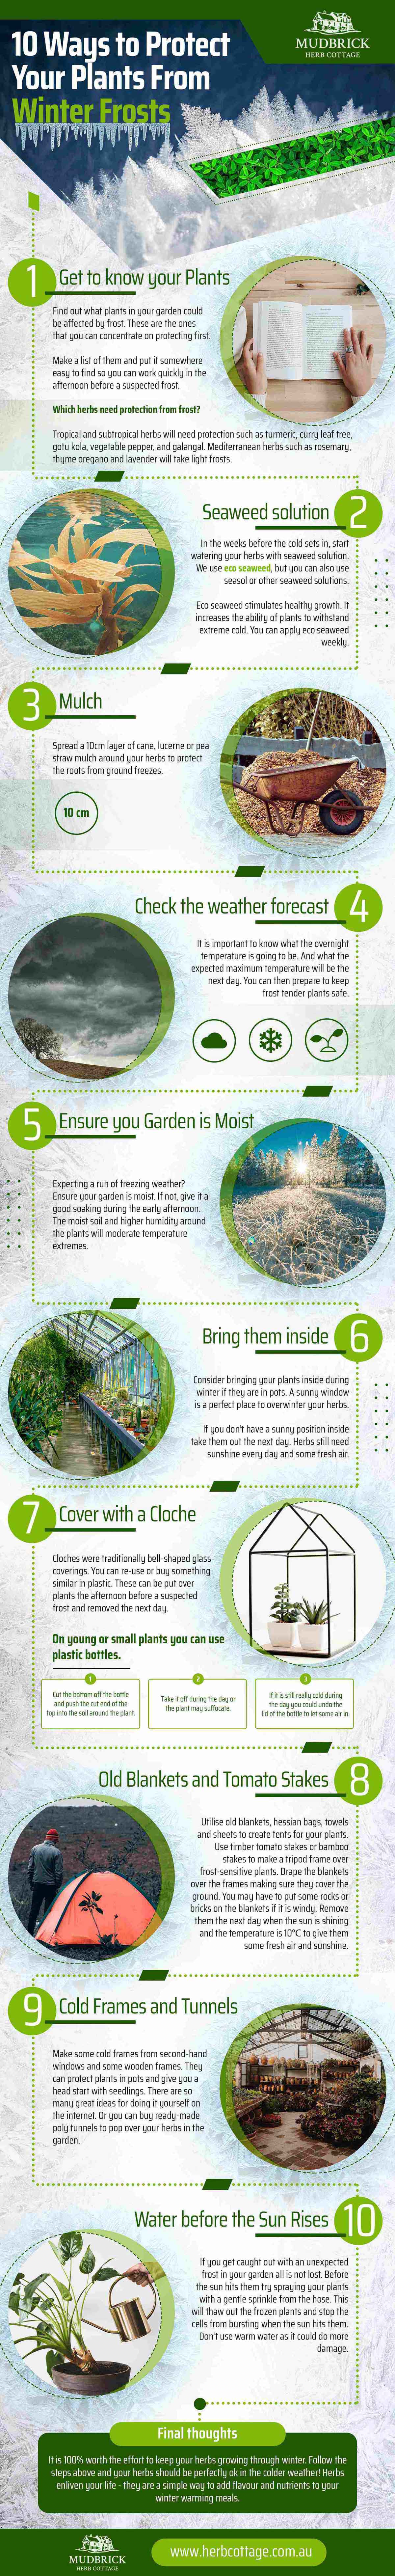 10 Ways To Protect Your Plants From Winter Frosts